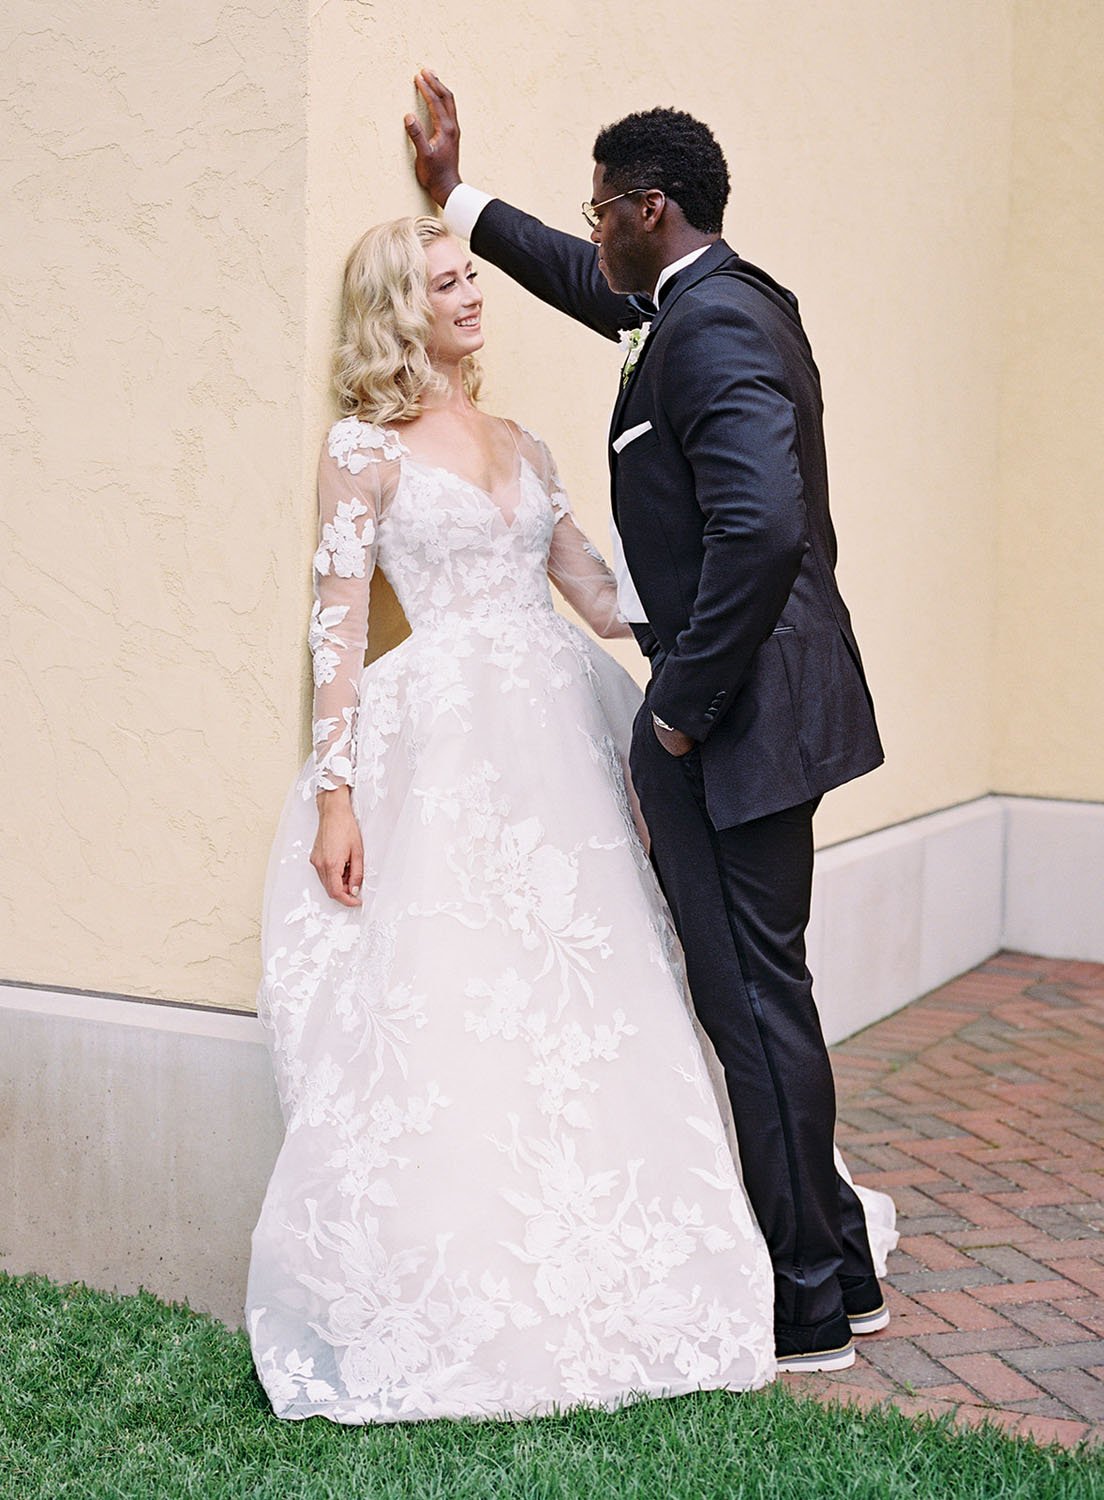  A bride and groom leaning against a wall in a courtyard during their spring garden wedding in Wisconsin. The bride is wearing 'Maeve' by Monique Lhuillier wedding dress. 